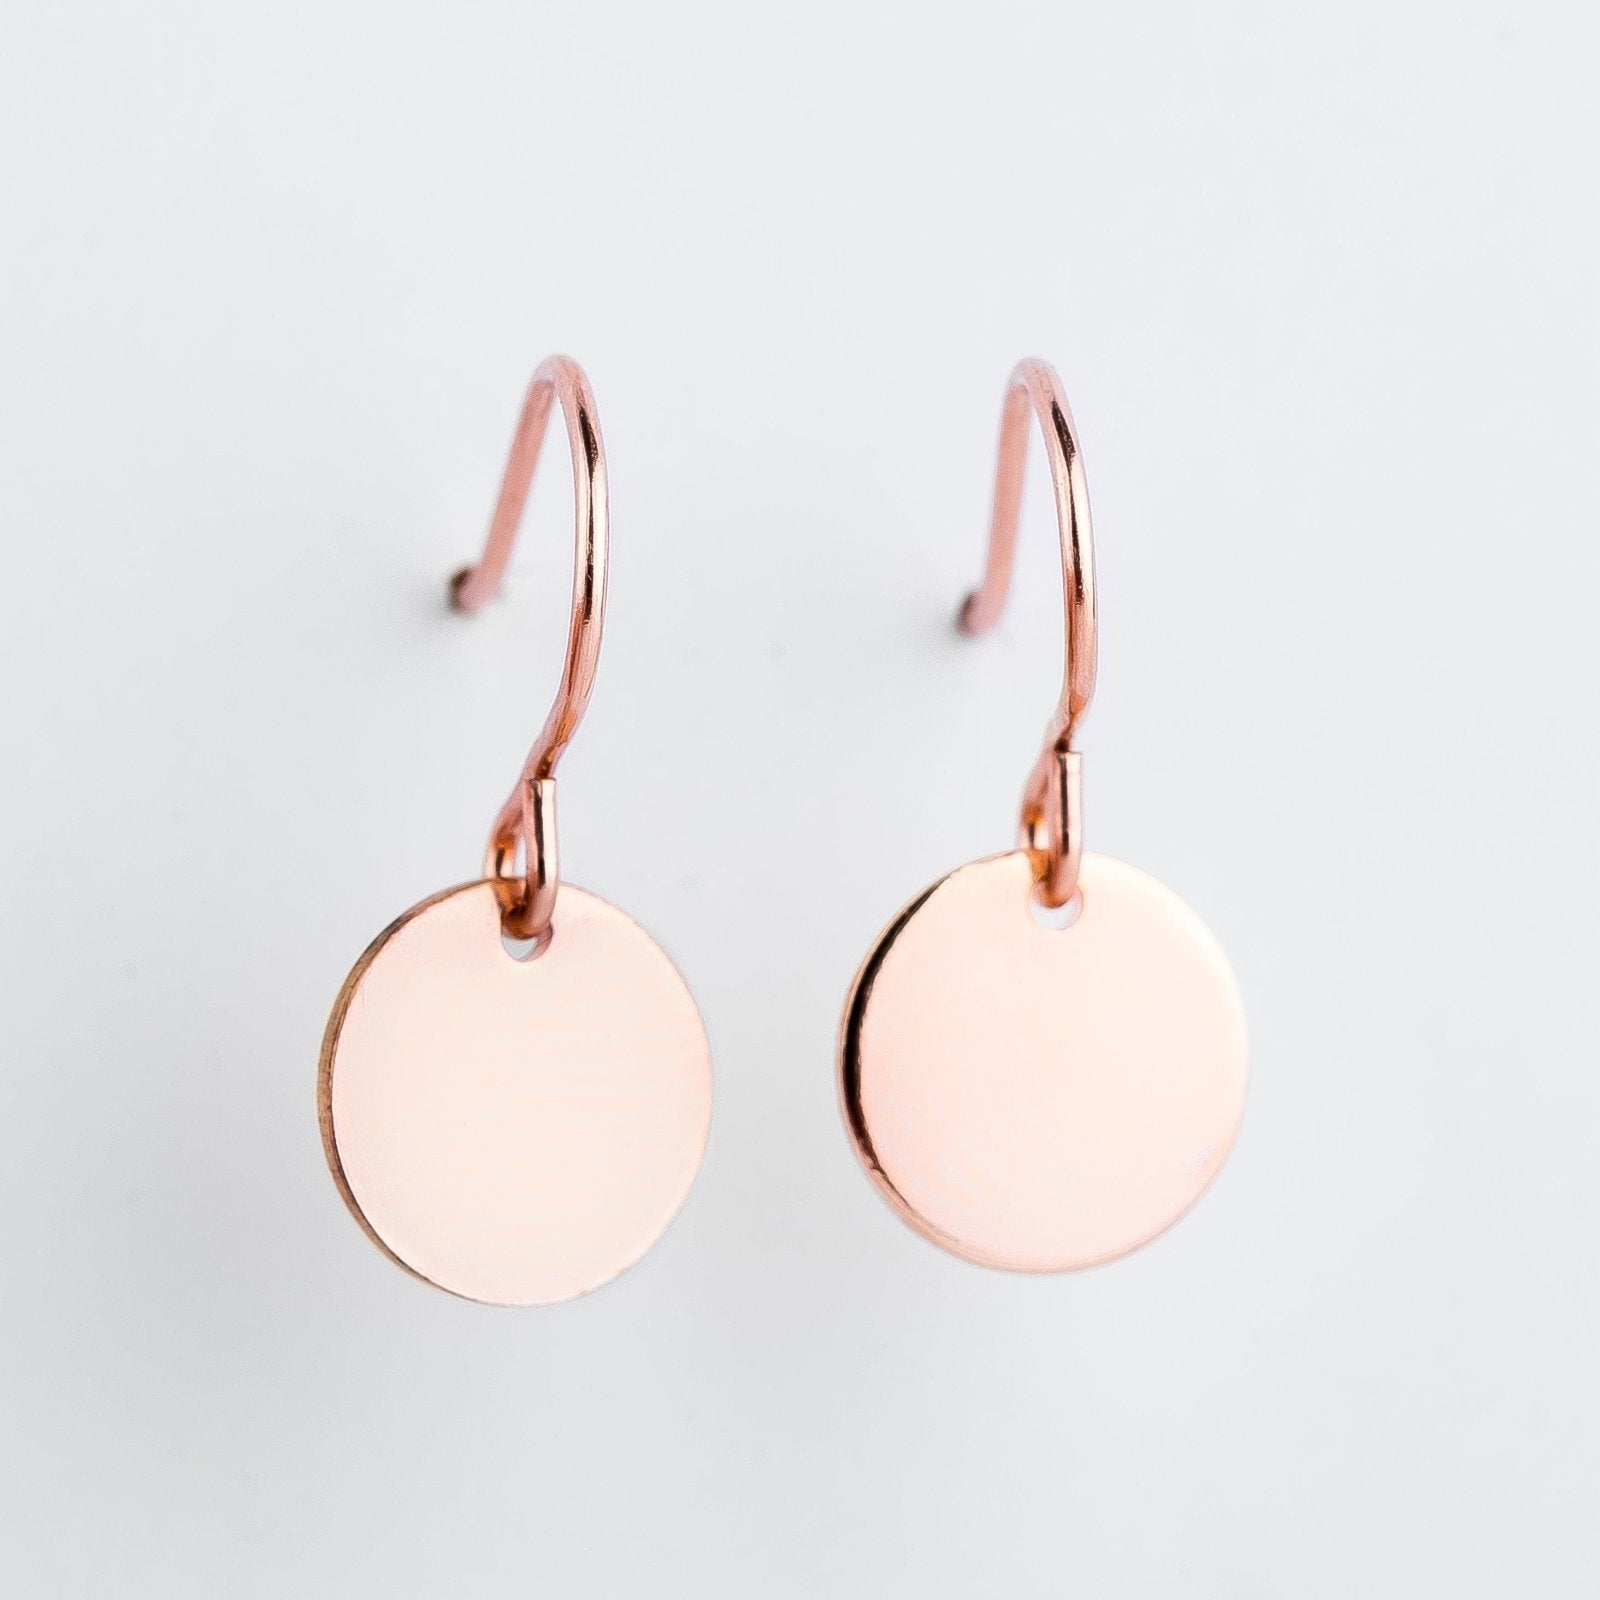 Round Circle Disc Dangle Earrings | Rose Gold - Melanie Golden Jewelry - dangle earrings, drop earrings, earrings, everyday, everyday essentials, minimal, minimal jewelry, rose, rose gold